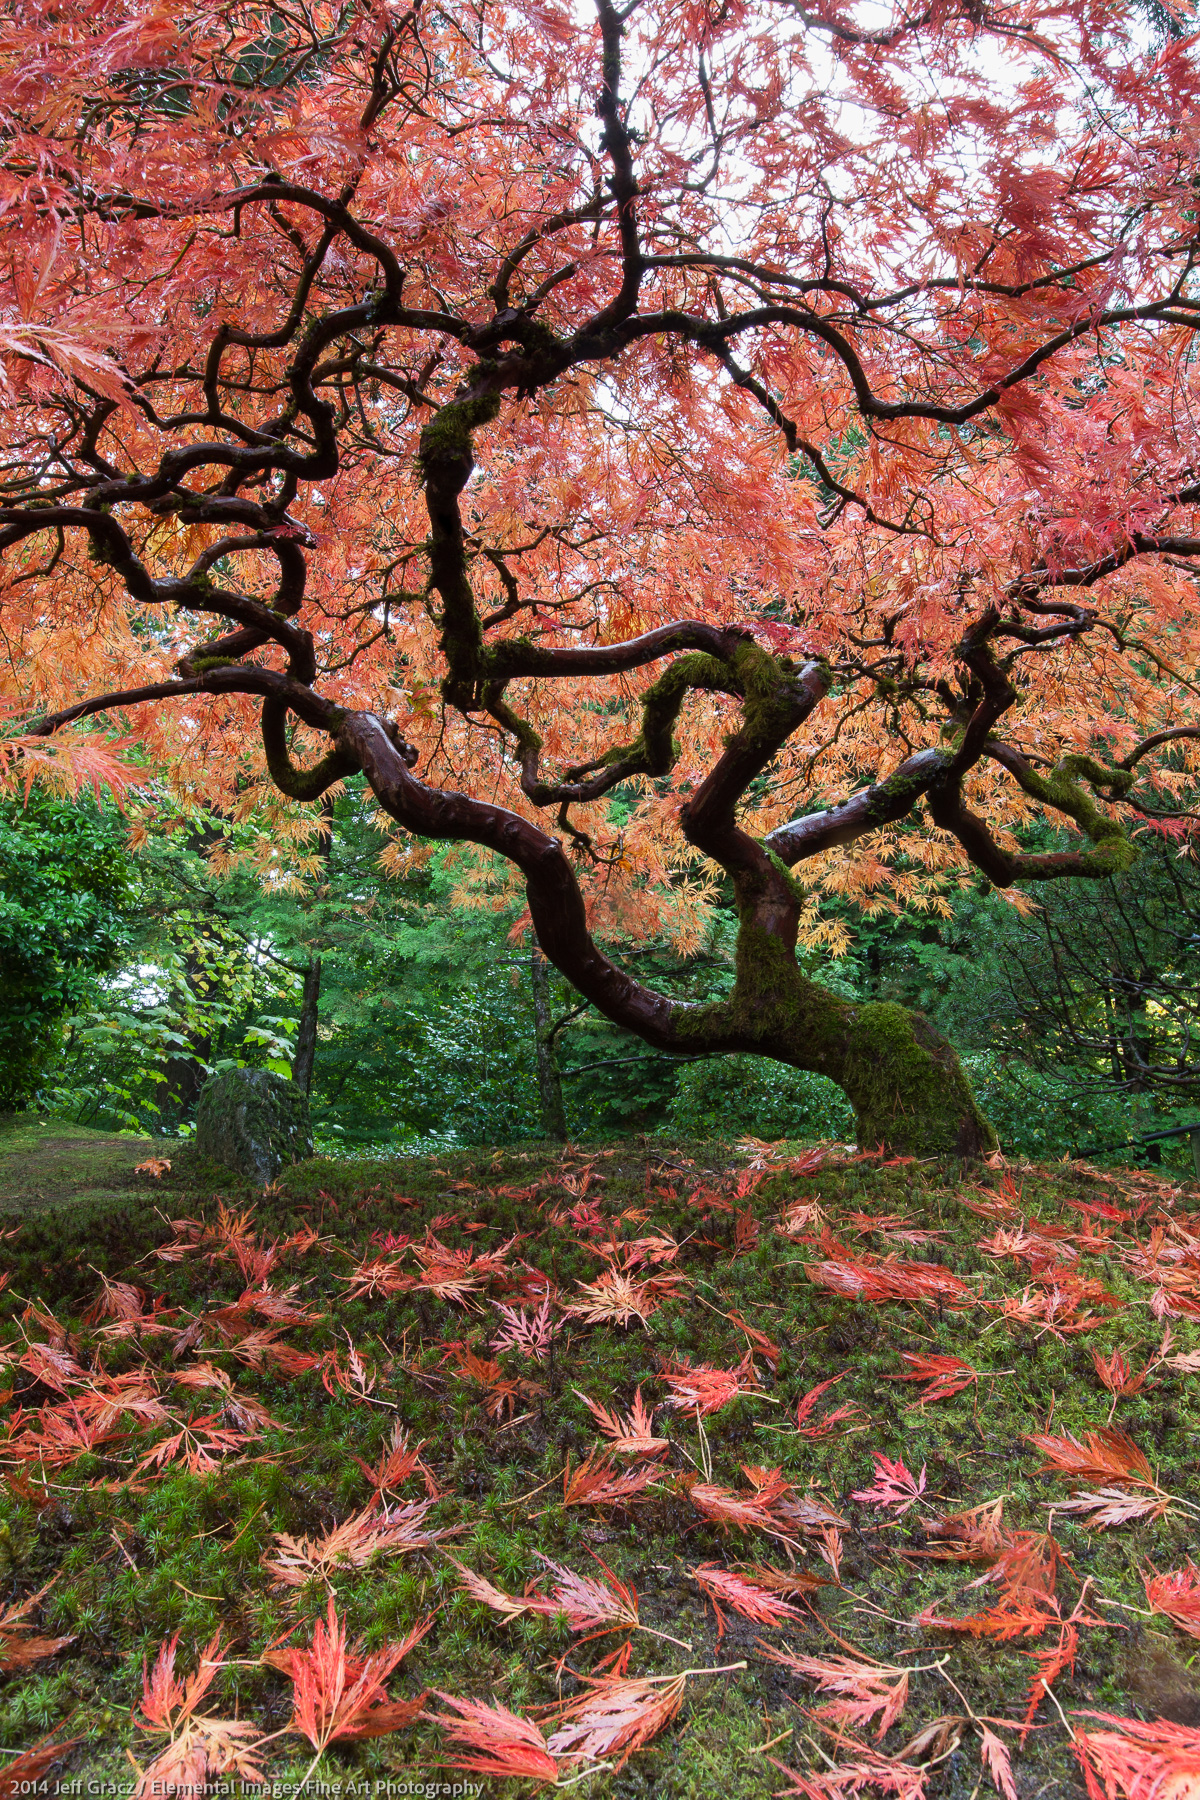 Japanese Maple with Fallen Leaves | Portland | OR | USA - © 2014 Jeff Gracz / Elemental Images Fine Art Photography - All Rights Reserved Worldwide